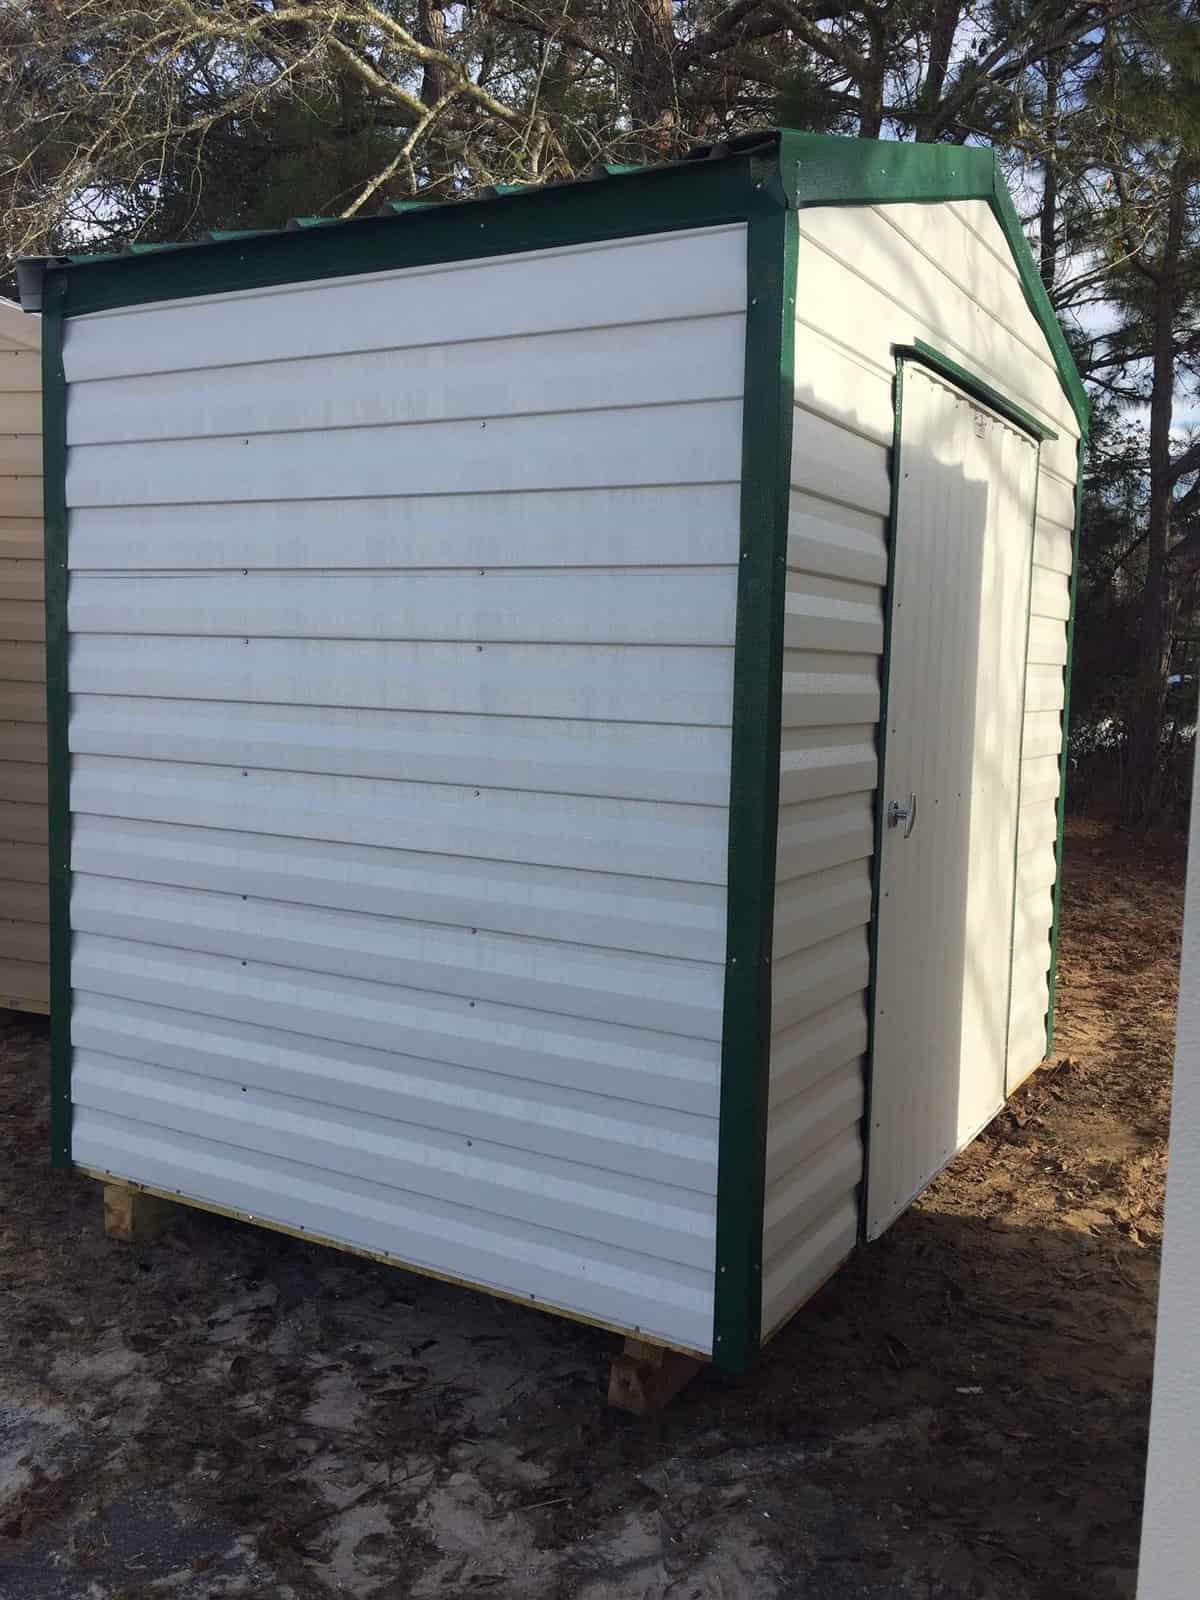 10x6 sheds for sale Robin sheds Probuilt Structures Sheds For Sale In Central Florida Shed in citrus county and sheds in marion county Green trim and white siding Robin sheds Probuilt Structures Sheds For Sale In Central Florida Shed in citrus county and sheds in marion county